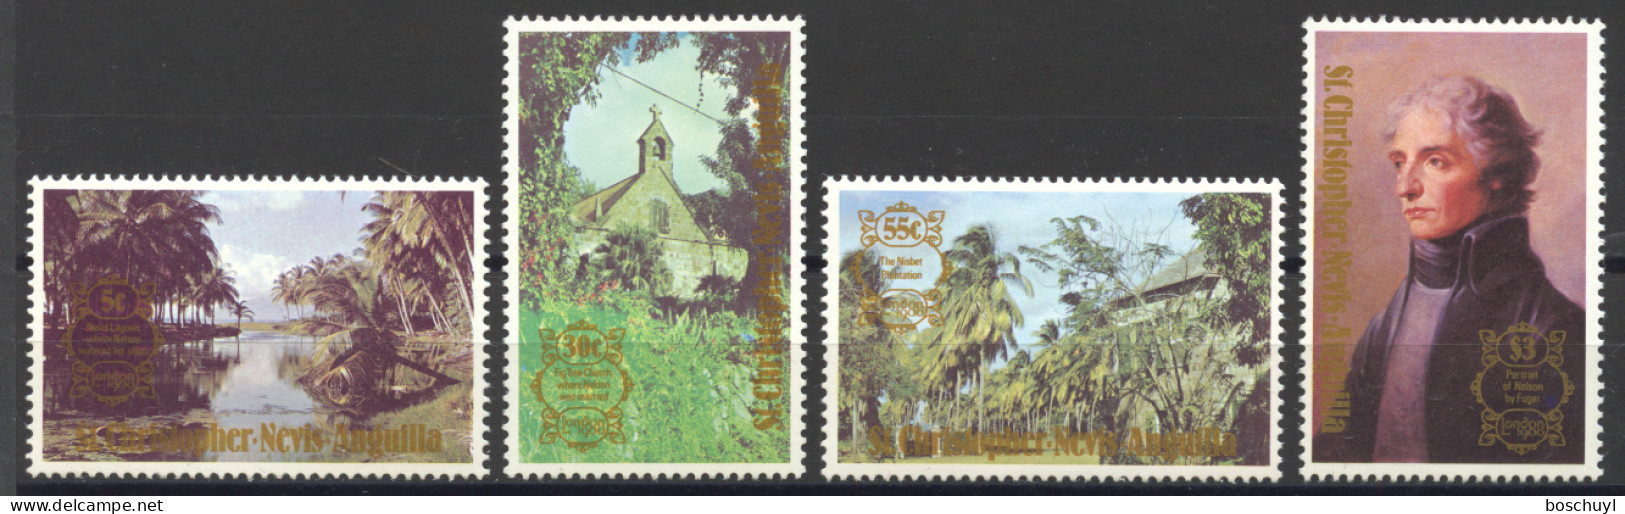 St Christopher, Nevis And Anguilla, 1980, London Stamp Exhibition, Lord Nelson, Lagoon, Church, MNH, Michel 392-395 - St.Christopher-Nevis & Anguilla (...-1980)